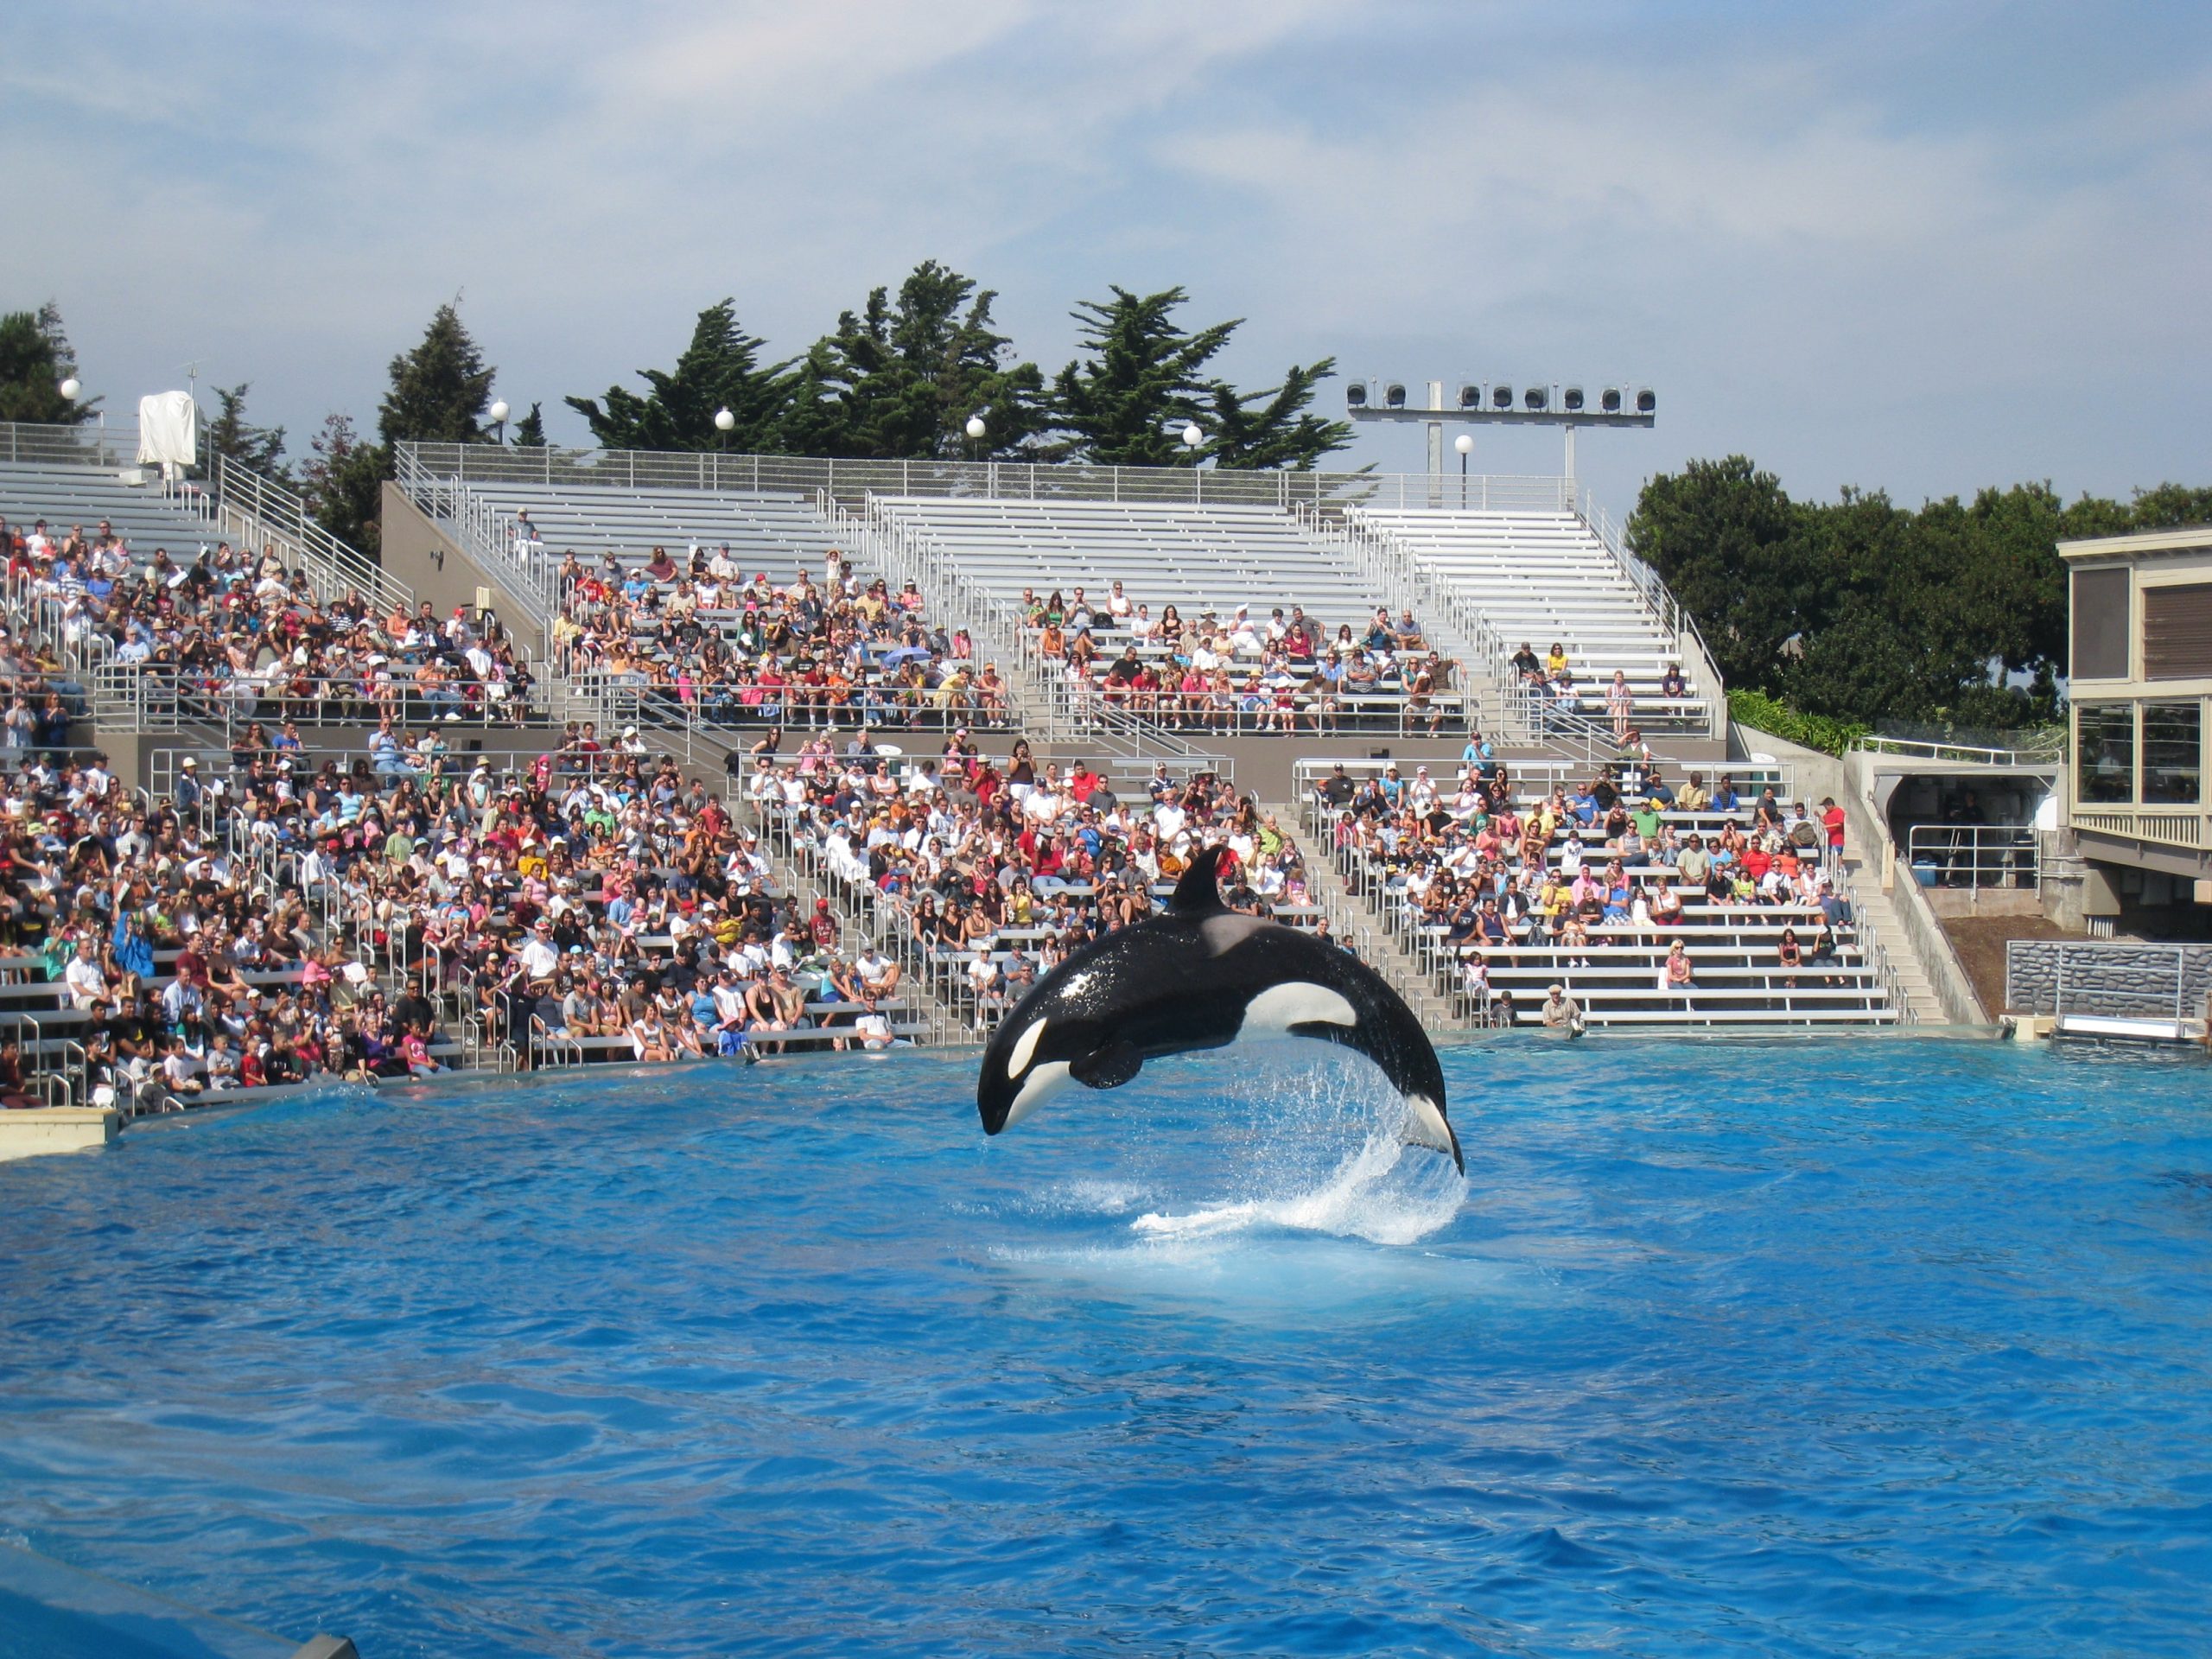 Lolita the Orca: Miami Seaquarium’s Iconic Orca Passes Away After 50 Years